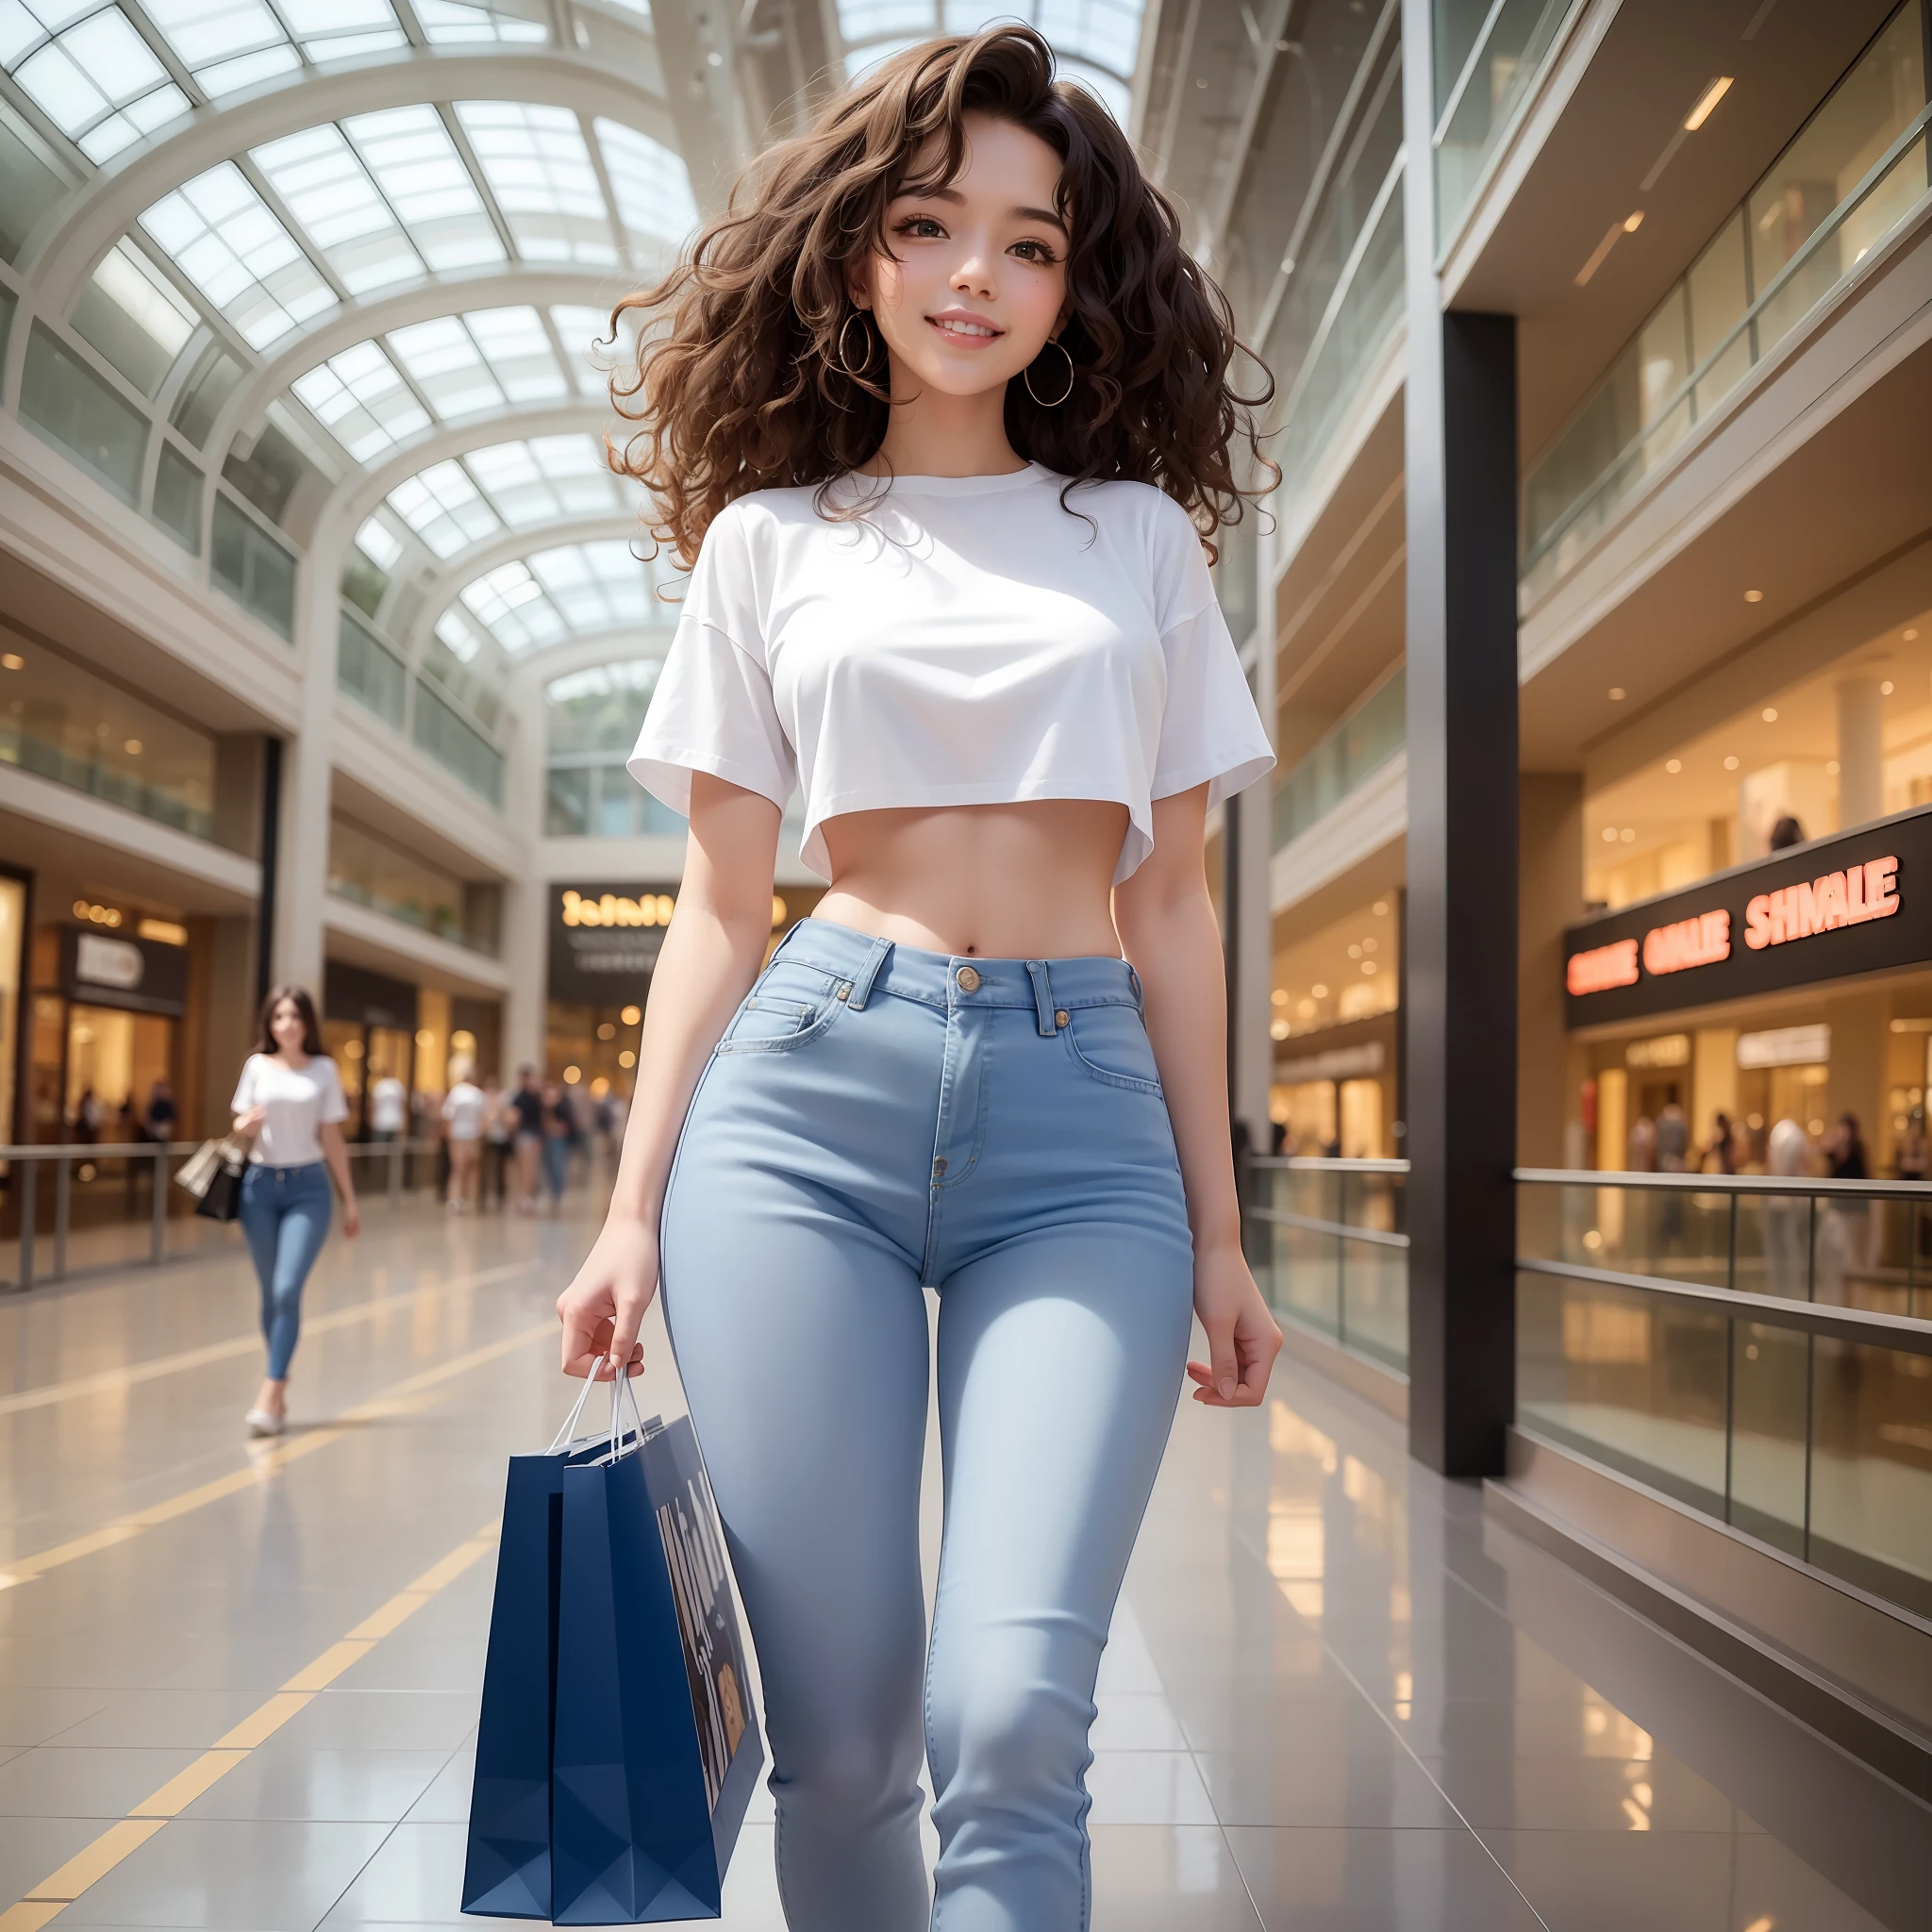 Masterpiece, best quality, super detailed,a beautiful girl,Curly hair, smile face,wearing white shirt and blue jeans, walking in the shopping malls, beautiful shopping malls background , detailed skin,8K, full body shot